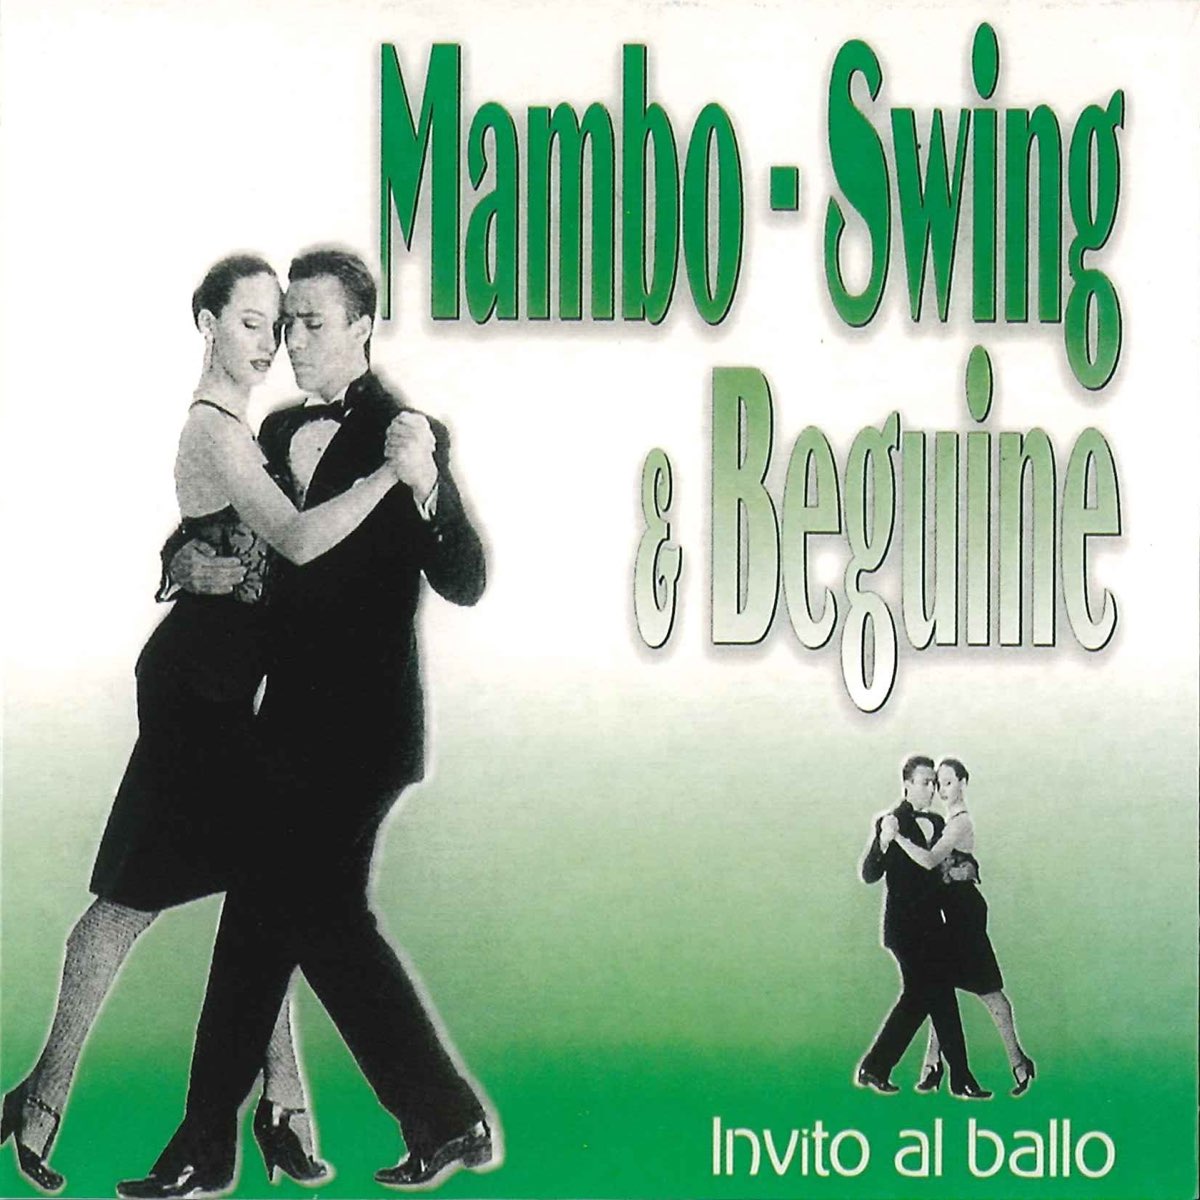 Mambo-Swing y Beguine by Various Artists on Apple Music